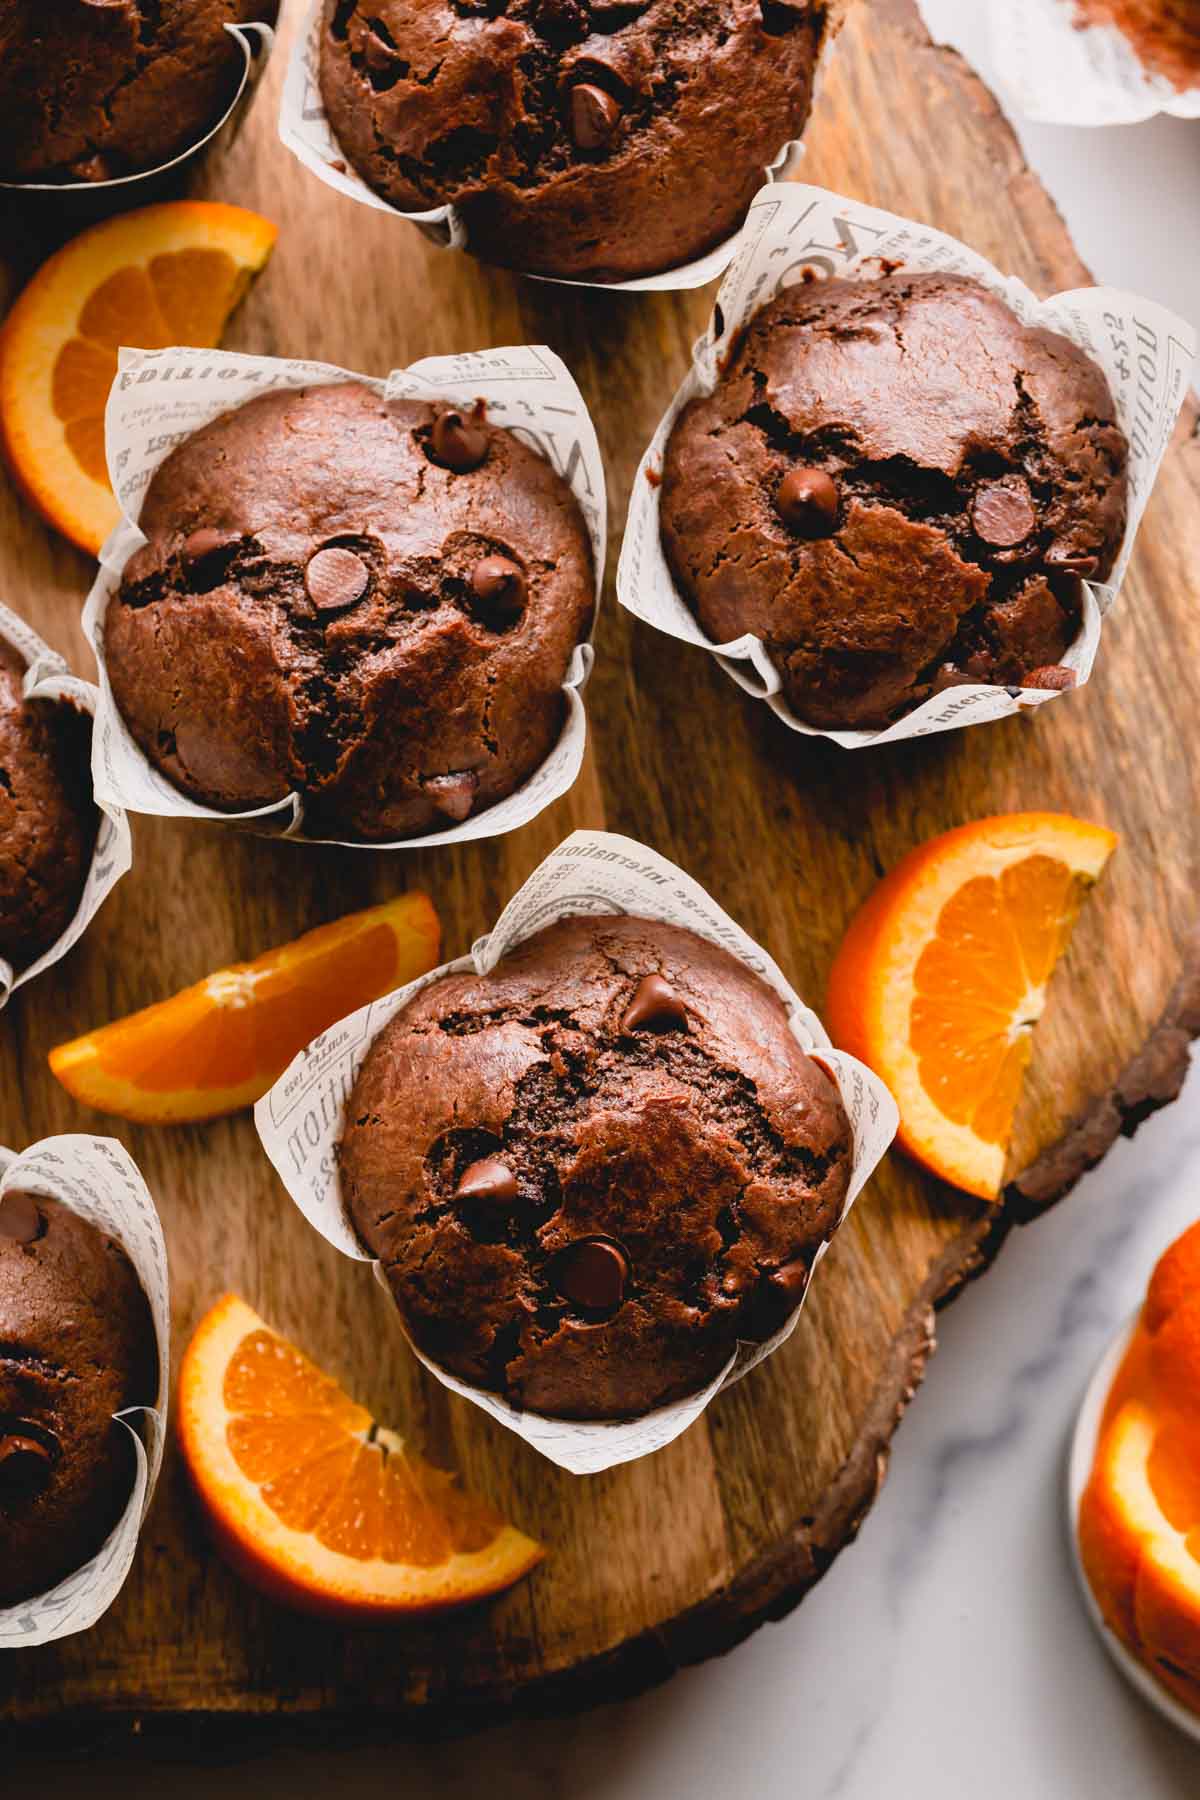 chocolate muffins with orange slices.